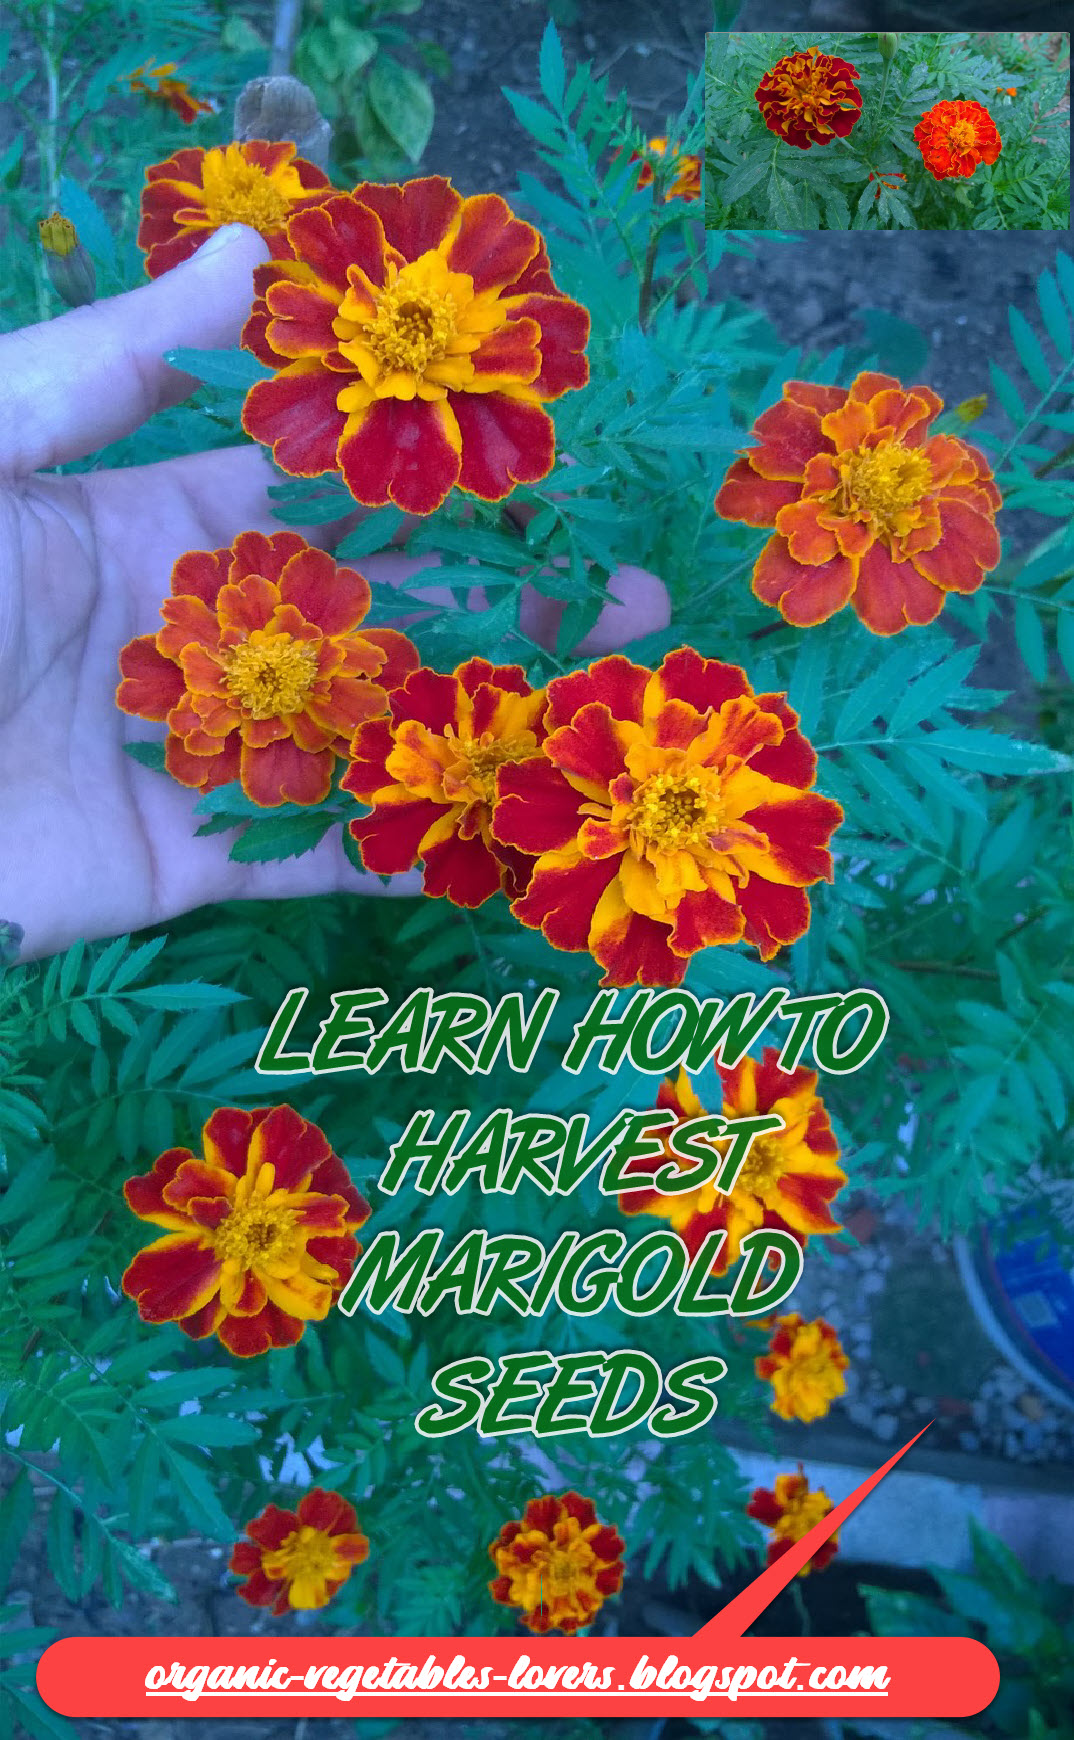 Marigolds are wonderful flowers to include in your garden! They repel bugs, are easy to grow, are drought tolerant, and bloom continually over a long season. If you have your own marigold plants then you can have many seeds for free . Go out and harvest them!